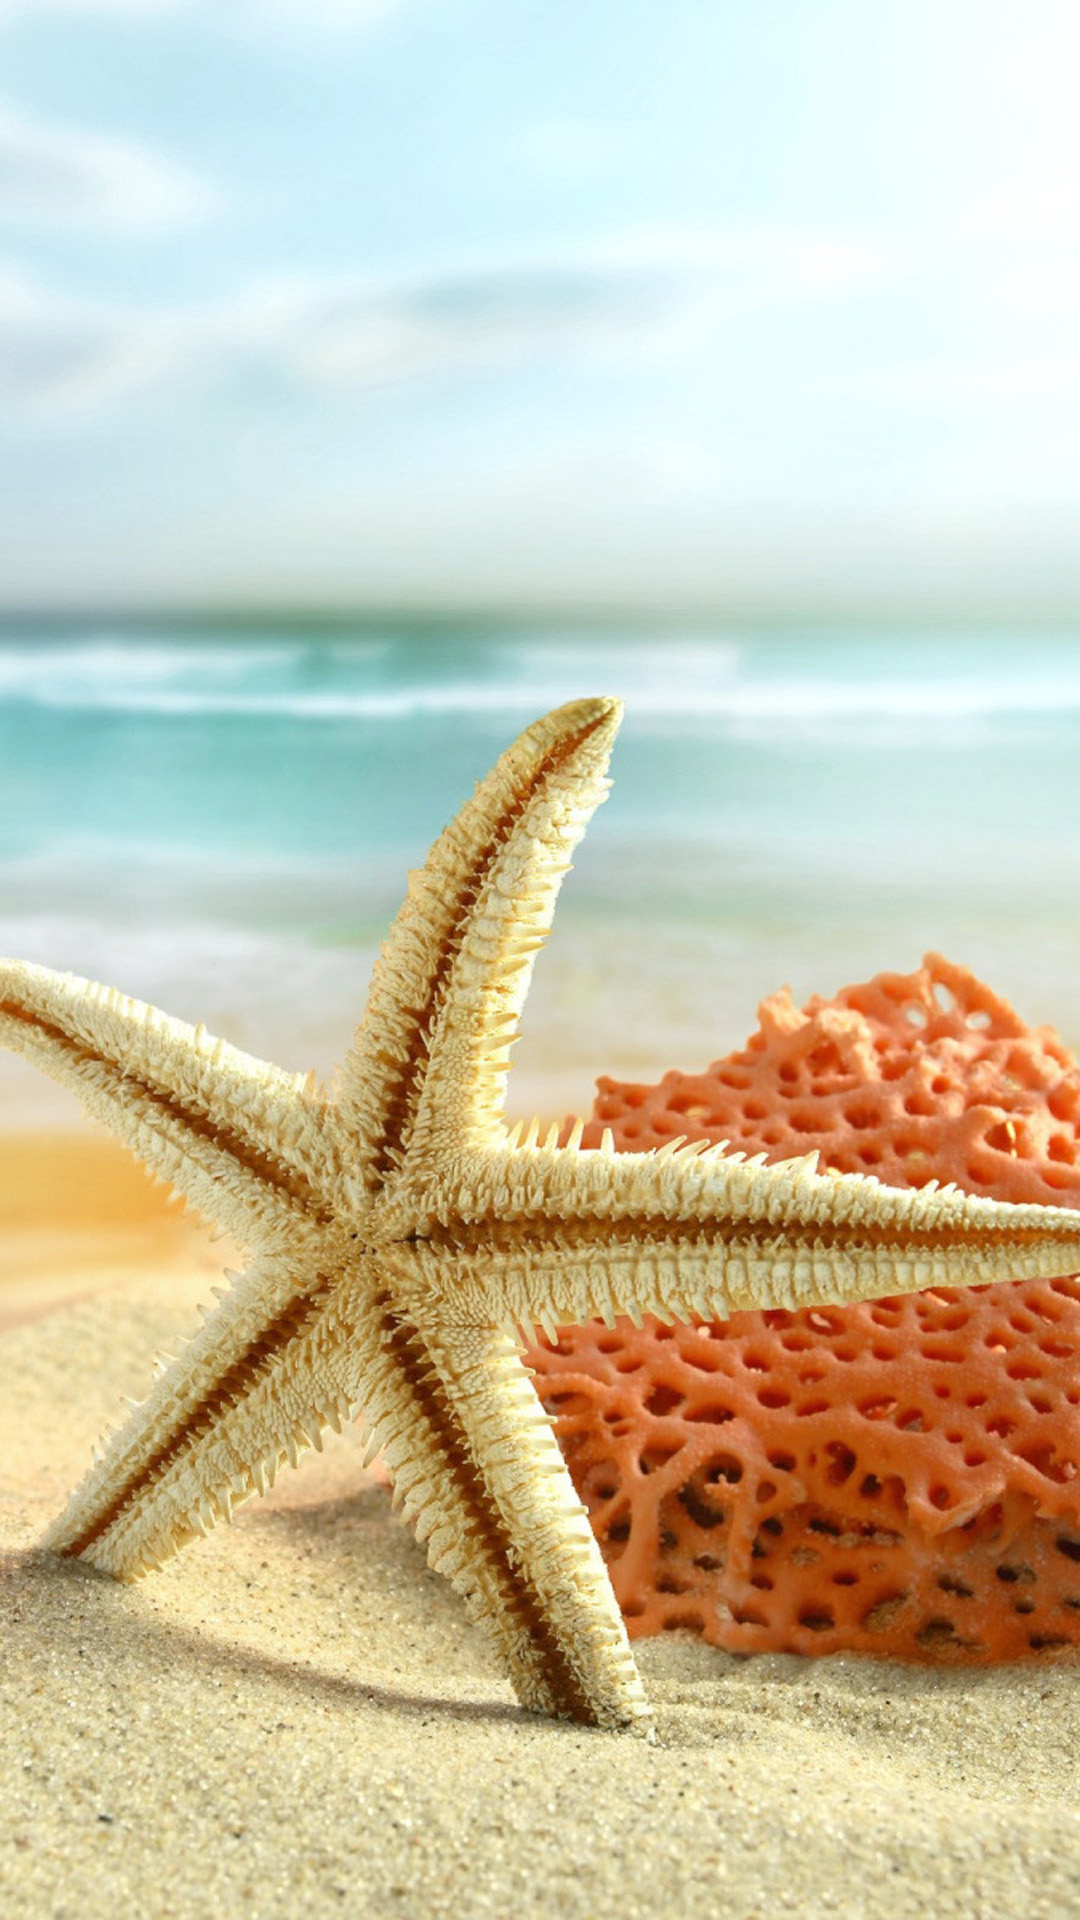 Starfish beach toys Android wallpaper